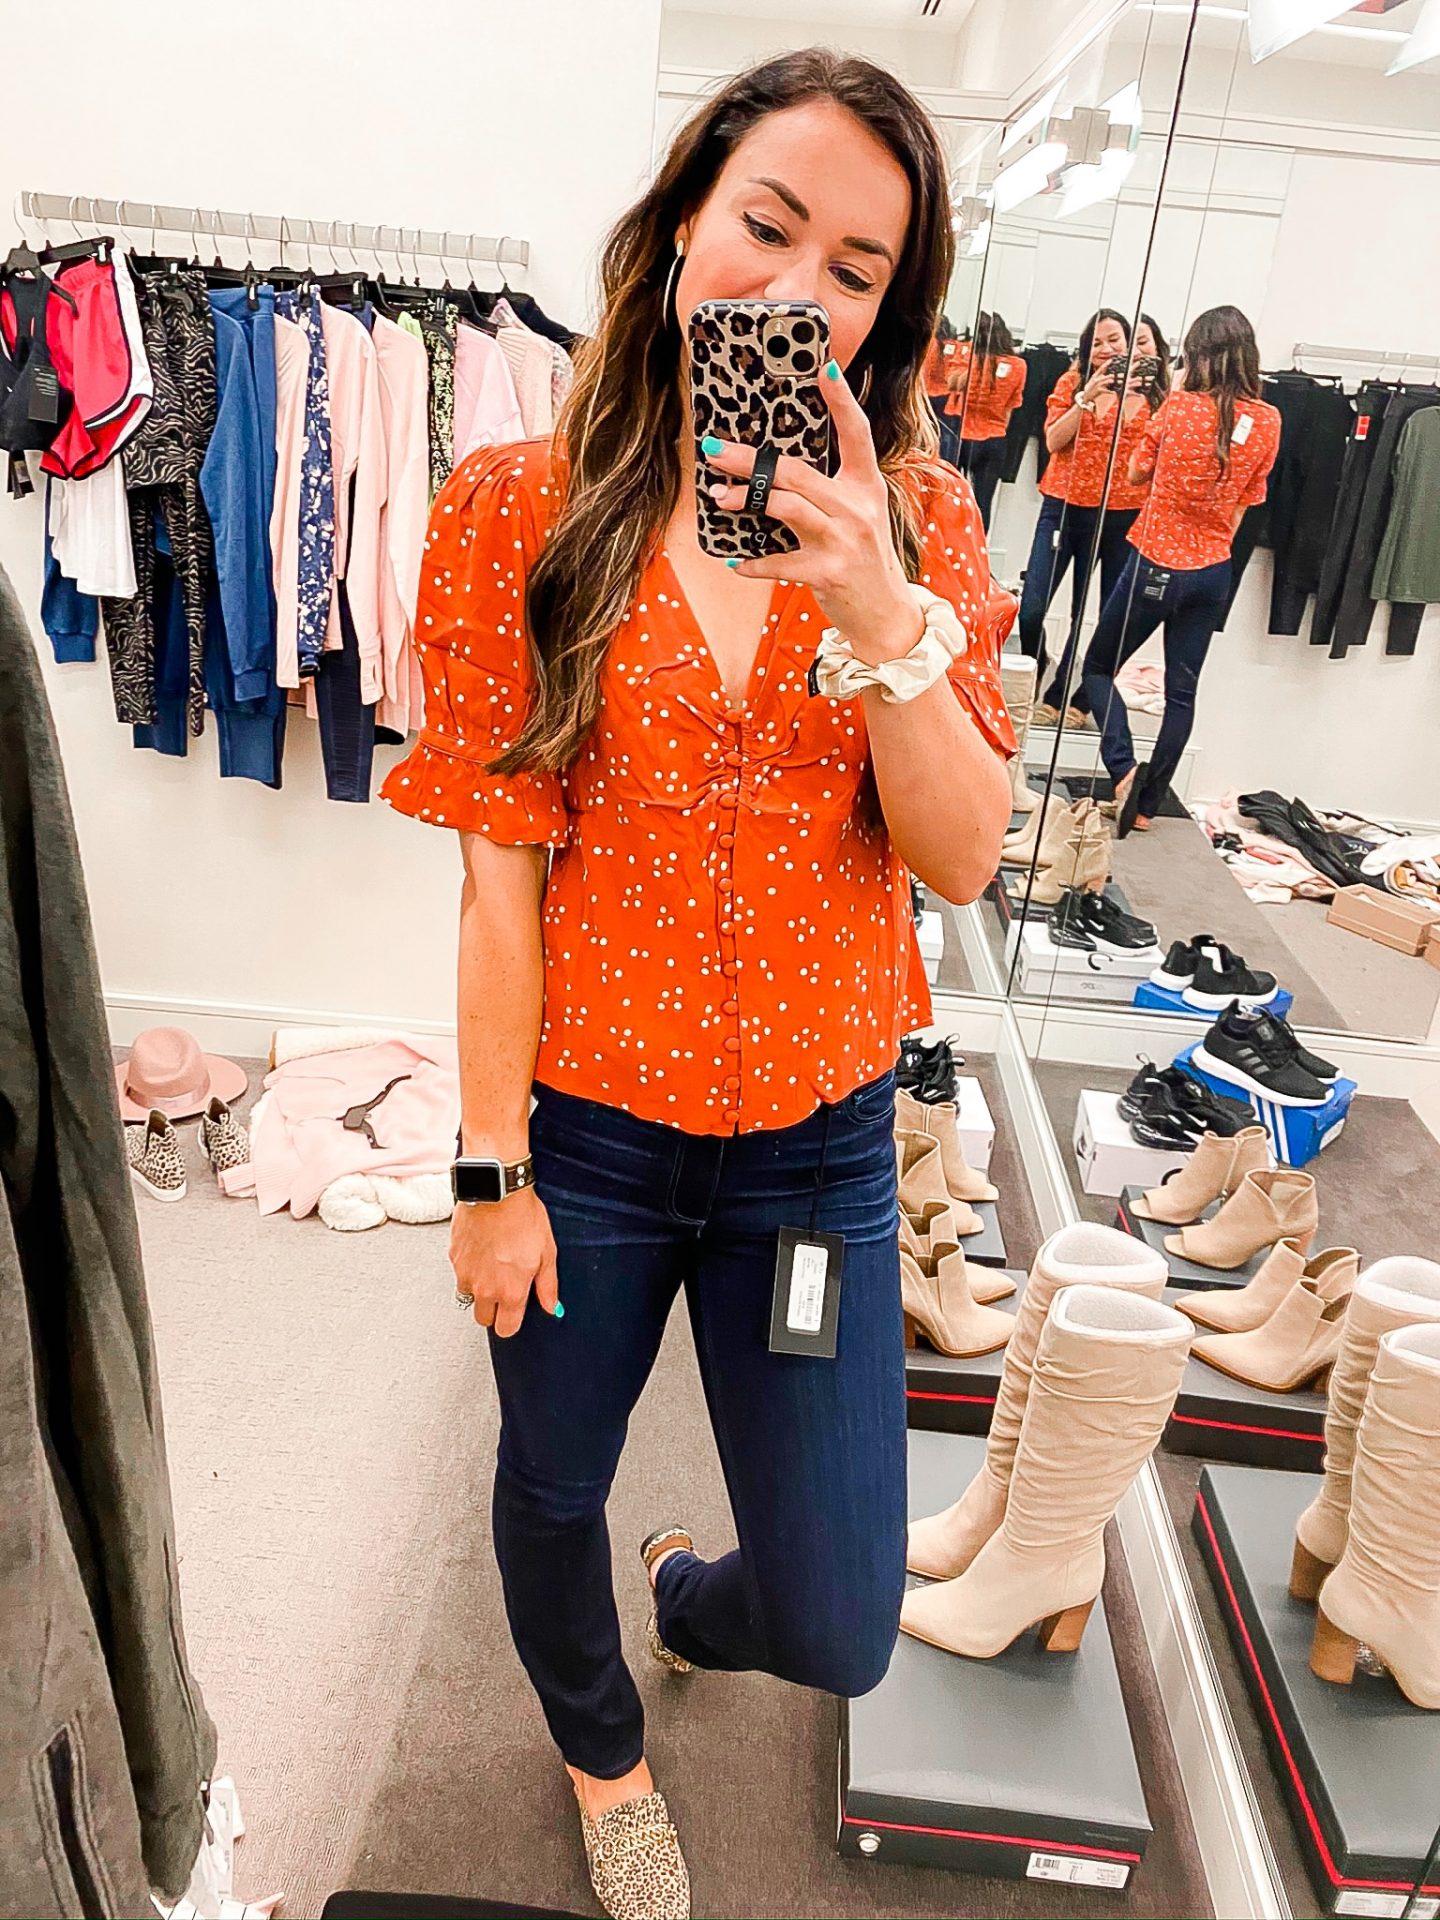 Nordstrom Anniversary Sale Try On Haul by Alabama Sale + Style blogger, Heather Brown // My Life Well Loved